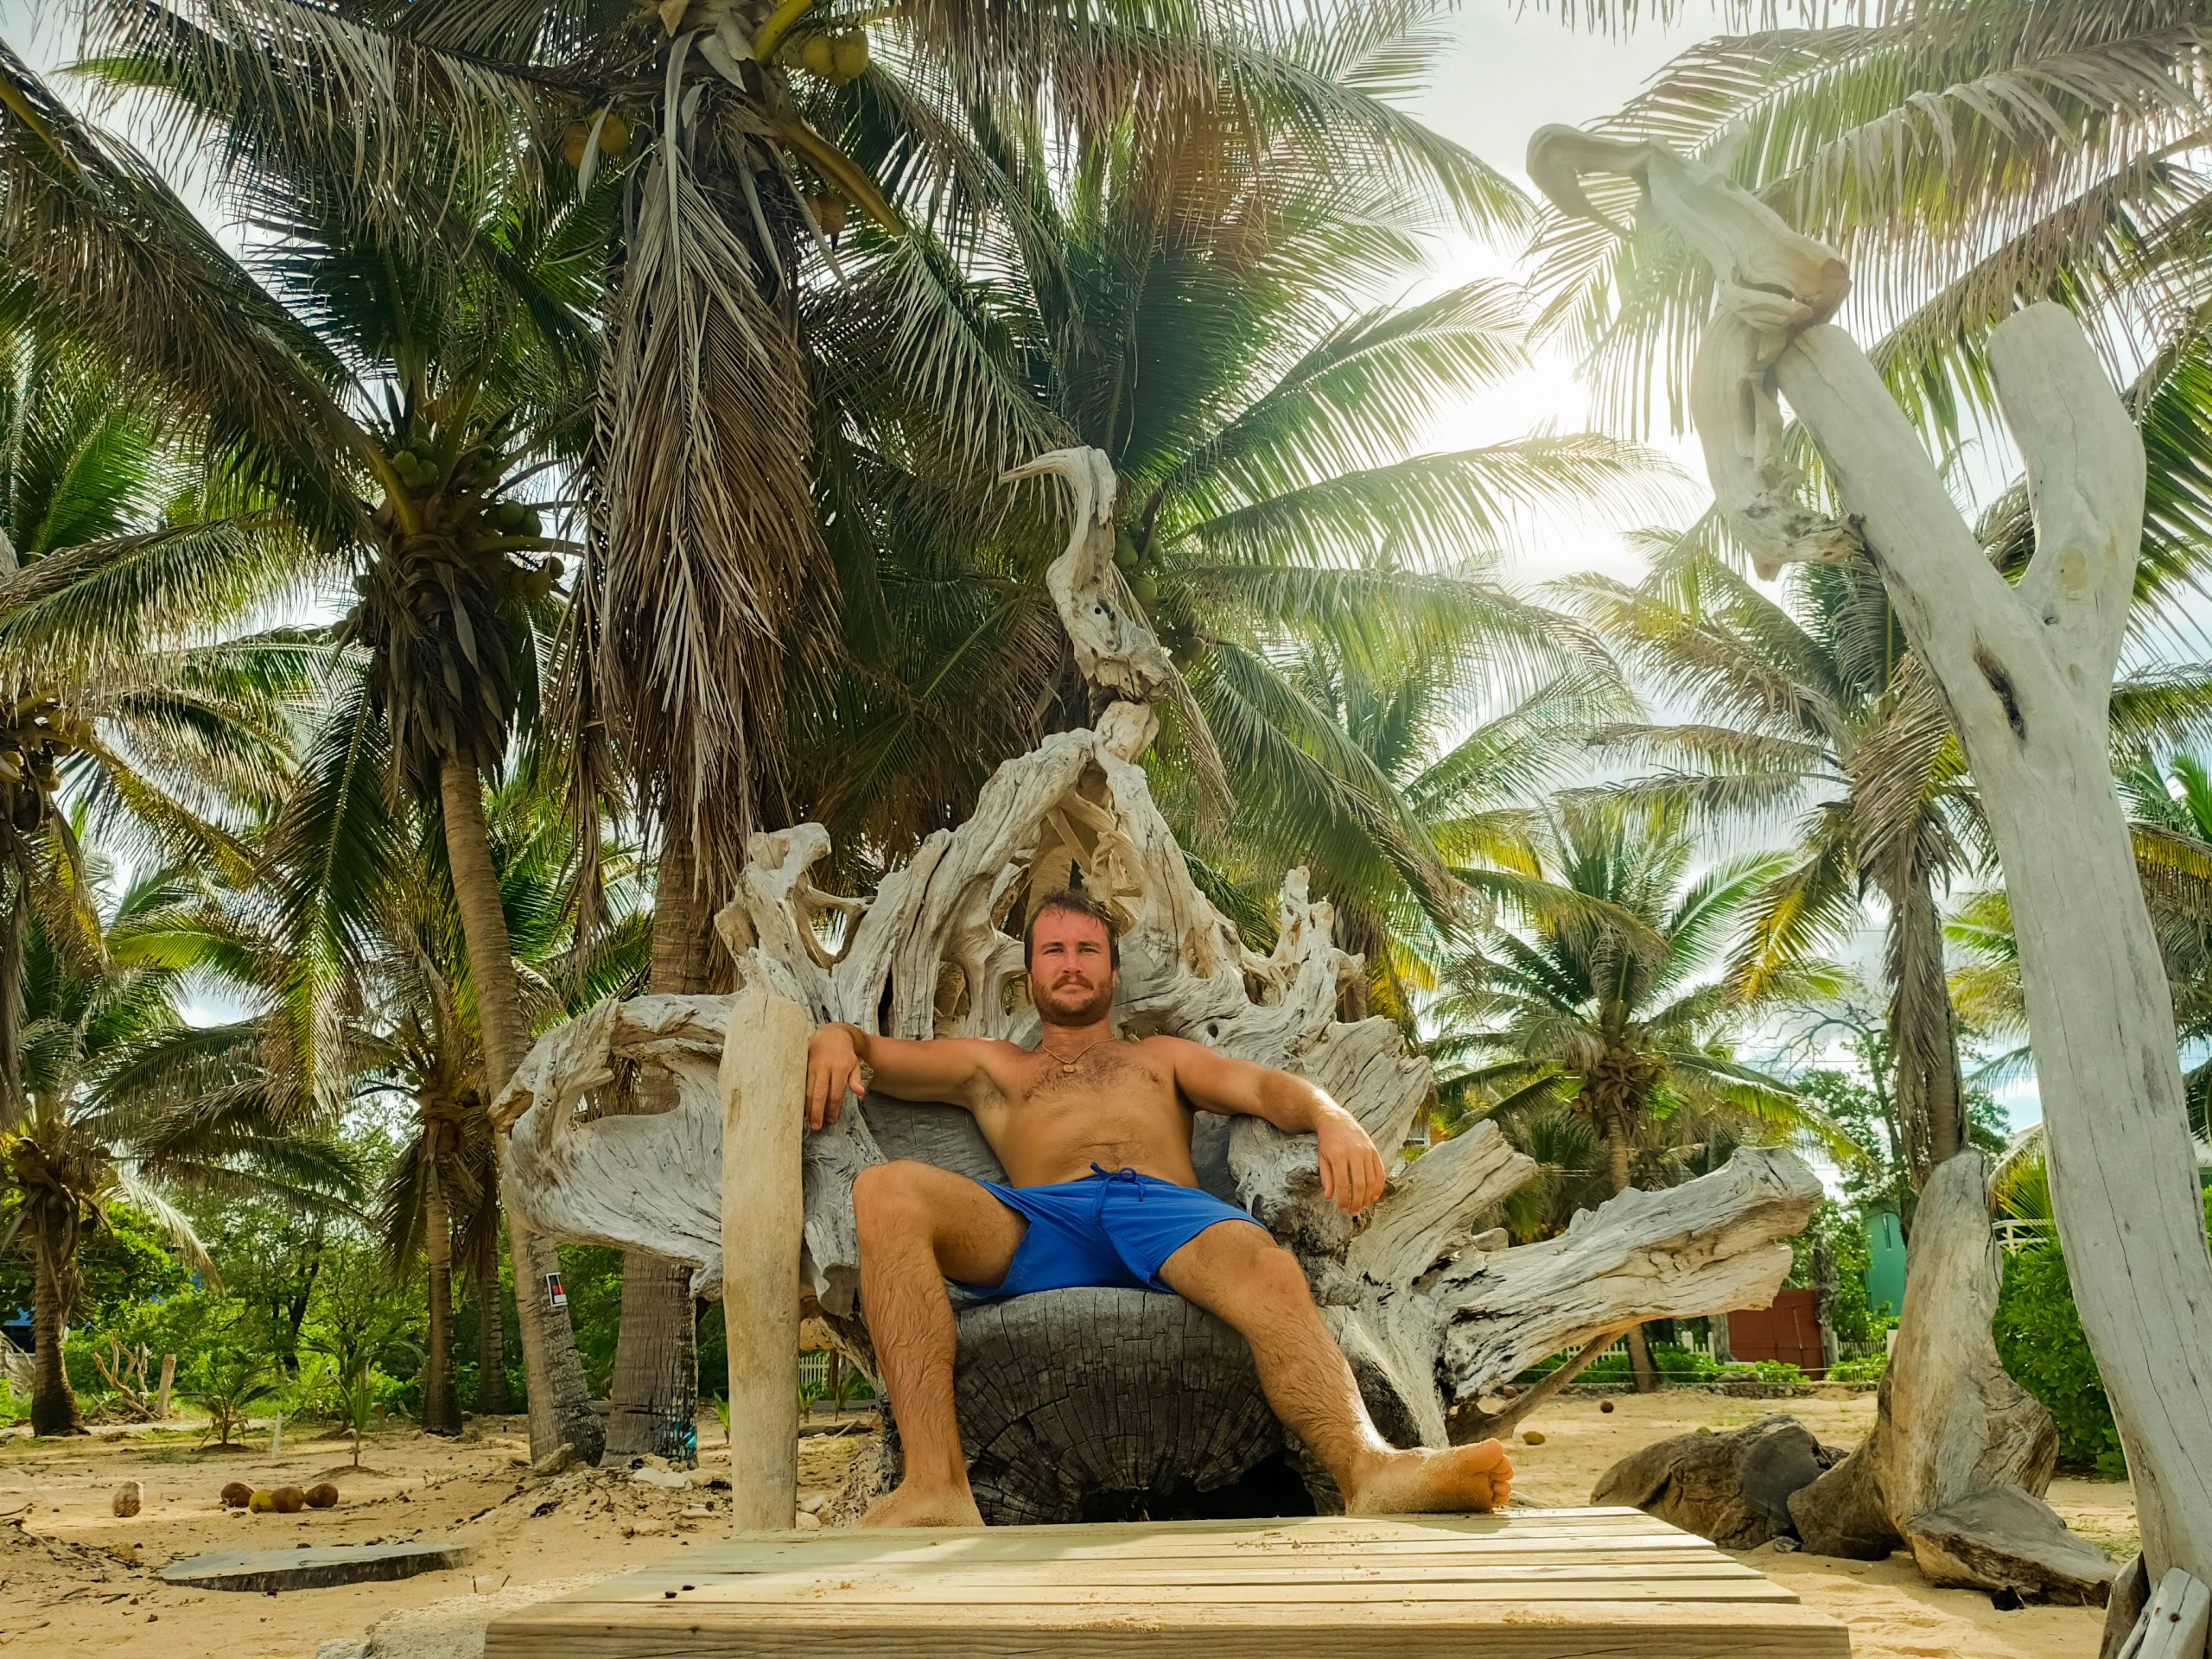 Me on a throne in Utila